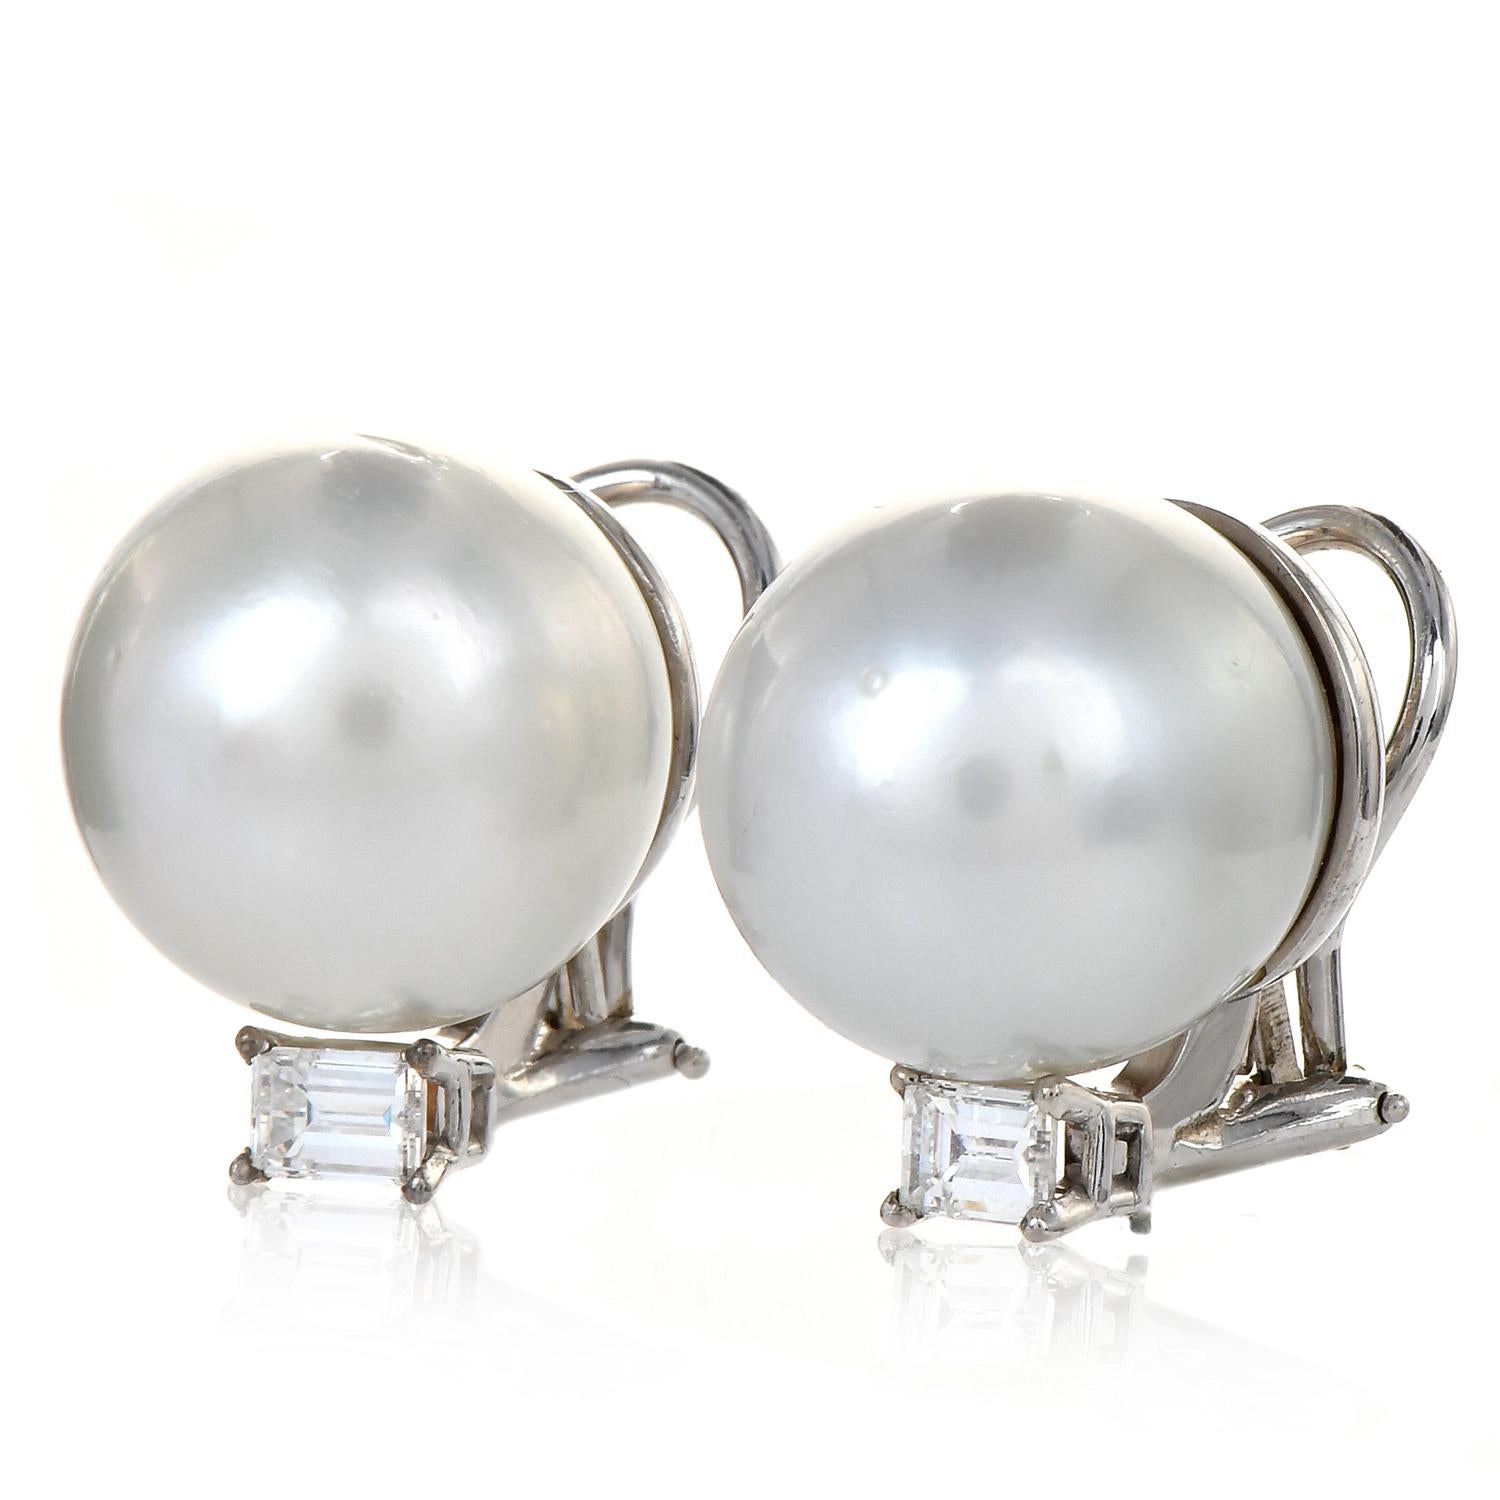 These glamorous jumbo South sea pearls earrings are in solid 14K white gold.  South Sea Pearls measuring 15mm, white-silver undertones,  and minimum blemishes.

Topped by (2) baguettes-cut, Well-matched extra white fiery Diamonds weighing